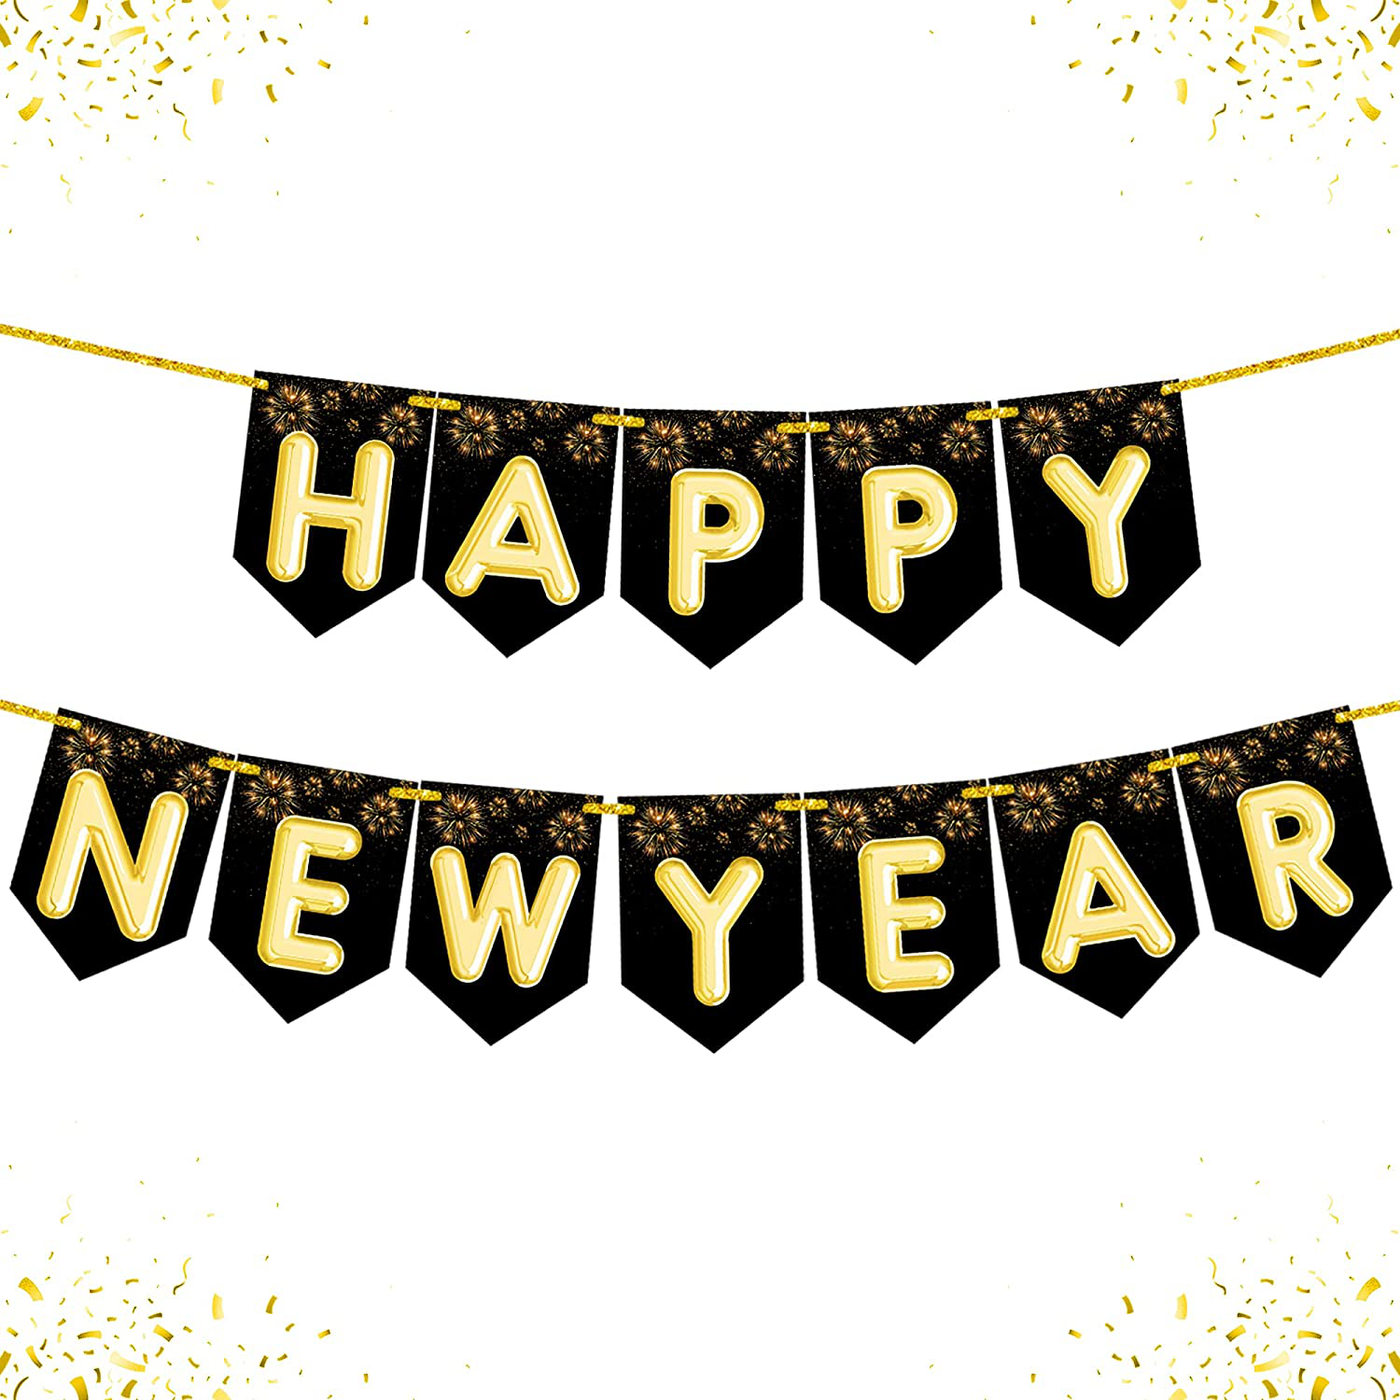 Shiny, Gold Happy New Year Banner 10 Foot 